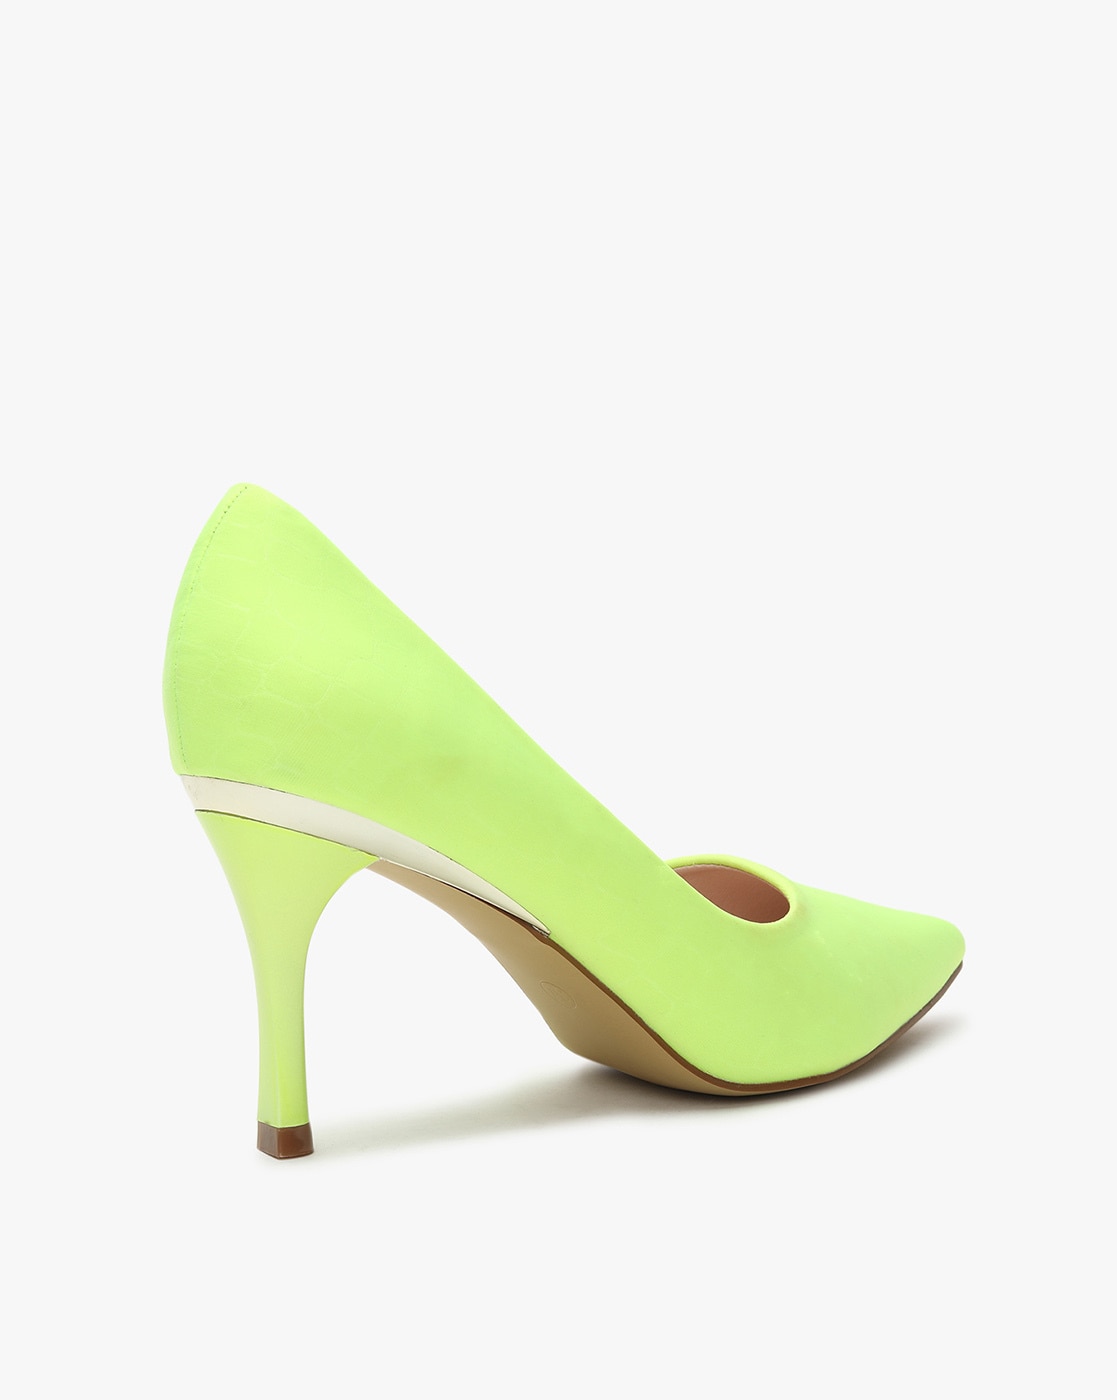 green pointy shoes